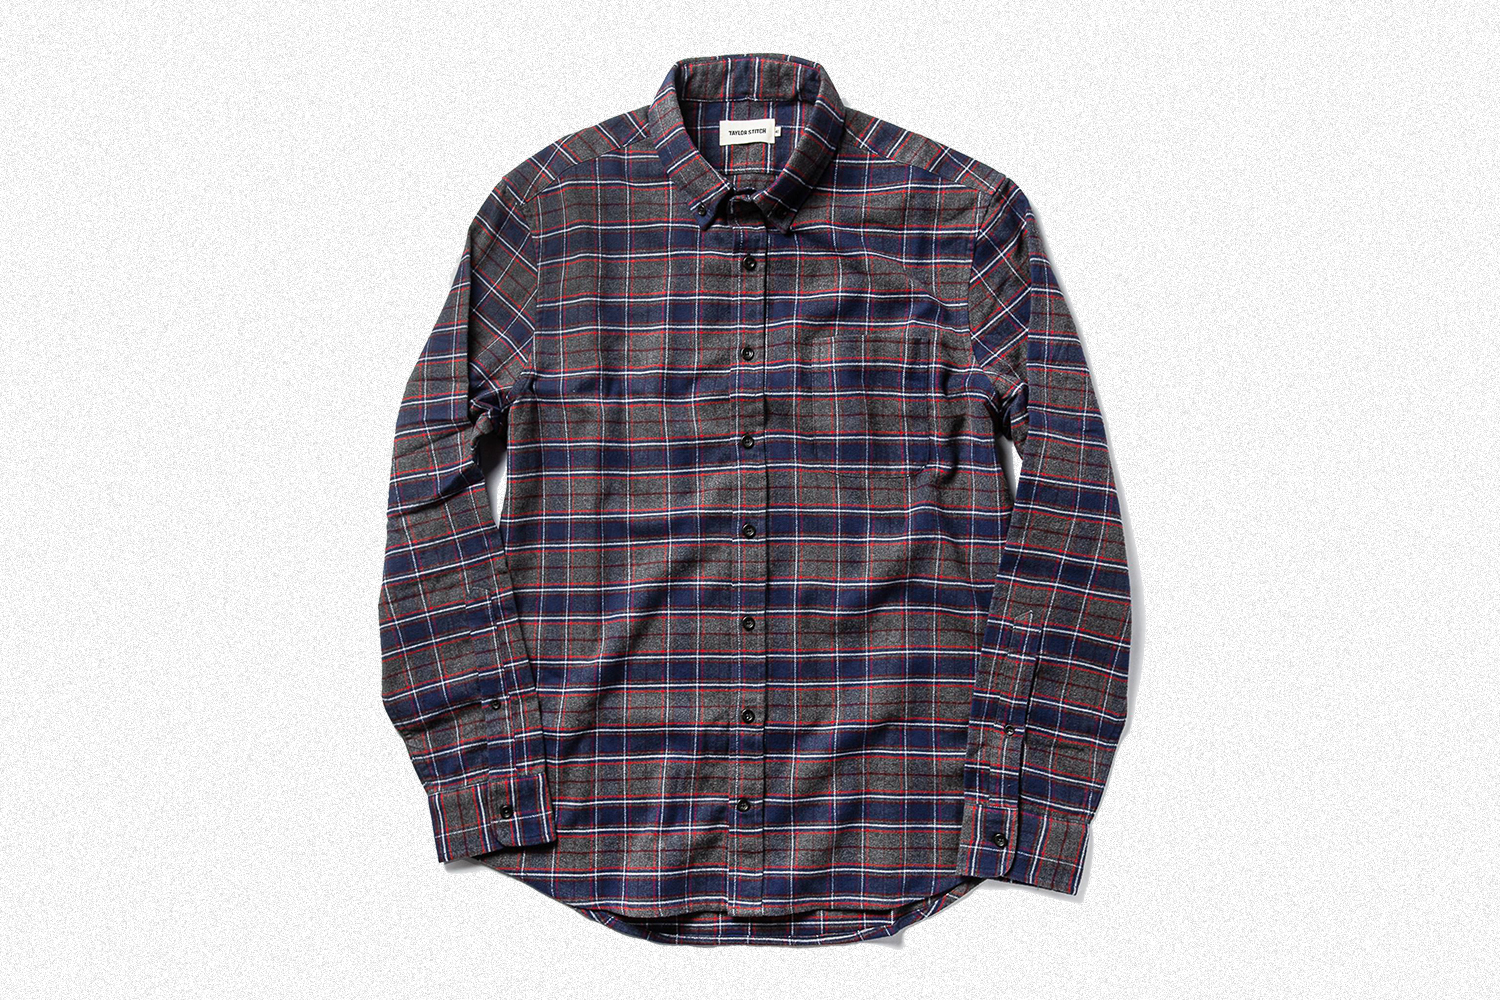 The Jack Shirt from Taylor Stitch